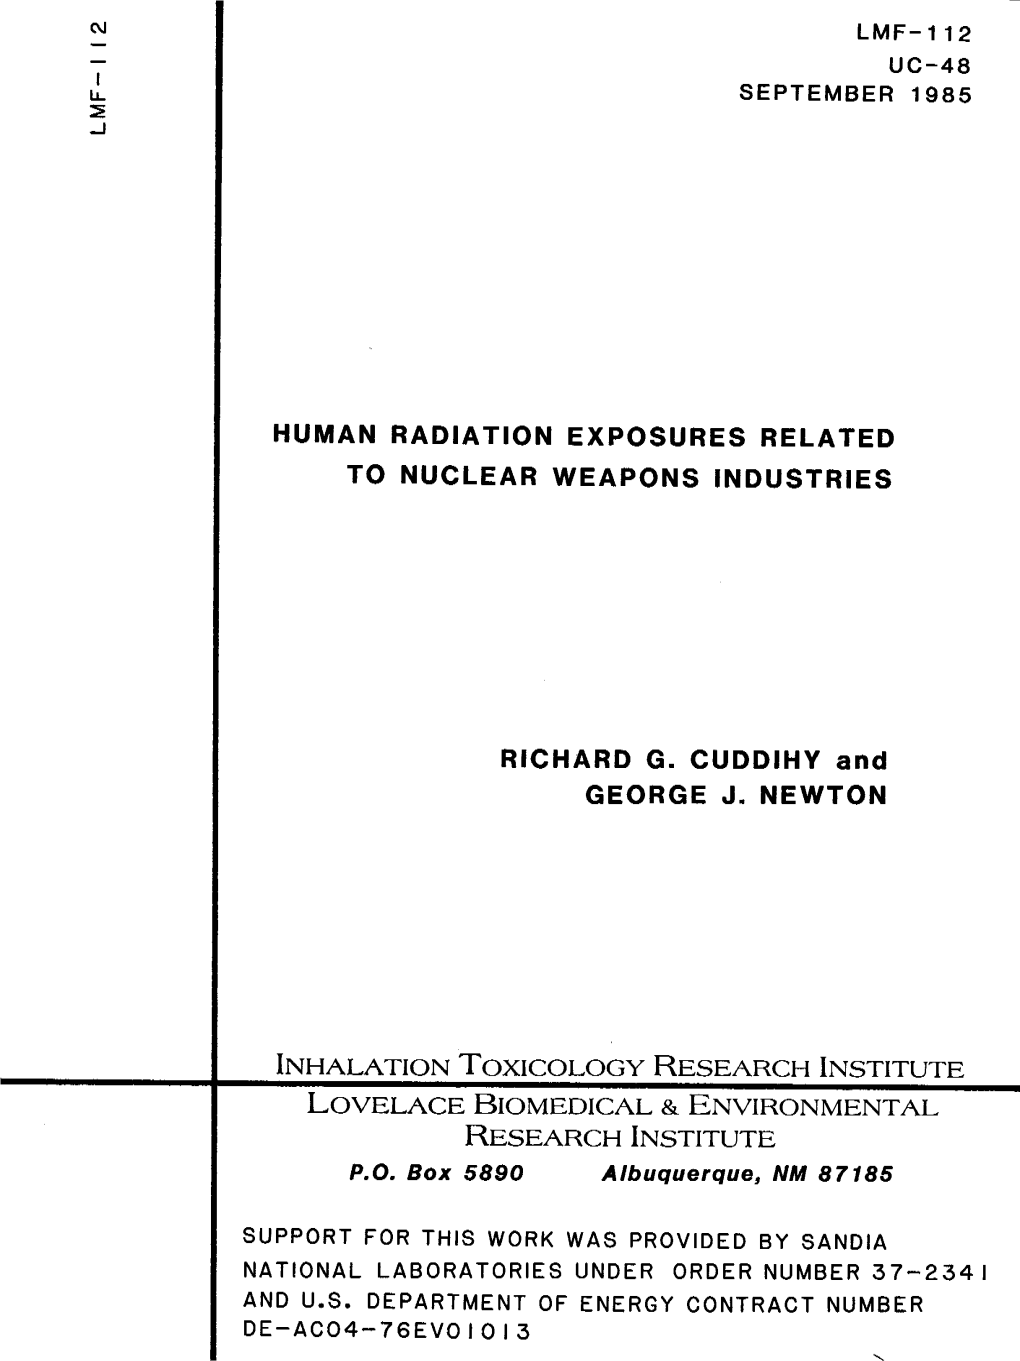 LMF-112 Human Radiation Exposures Related to Nuclear Weapons.PDF